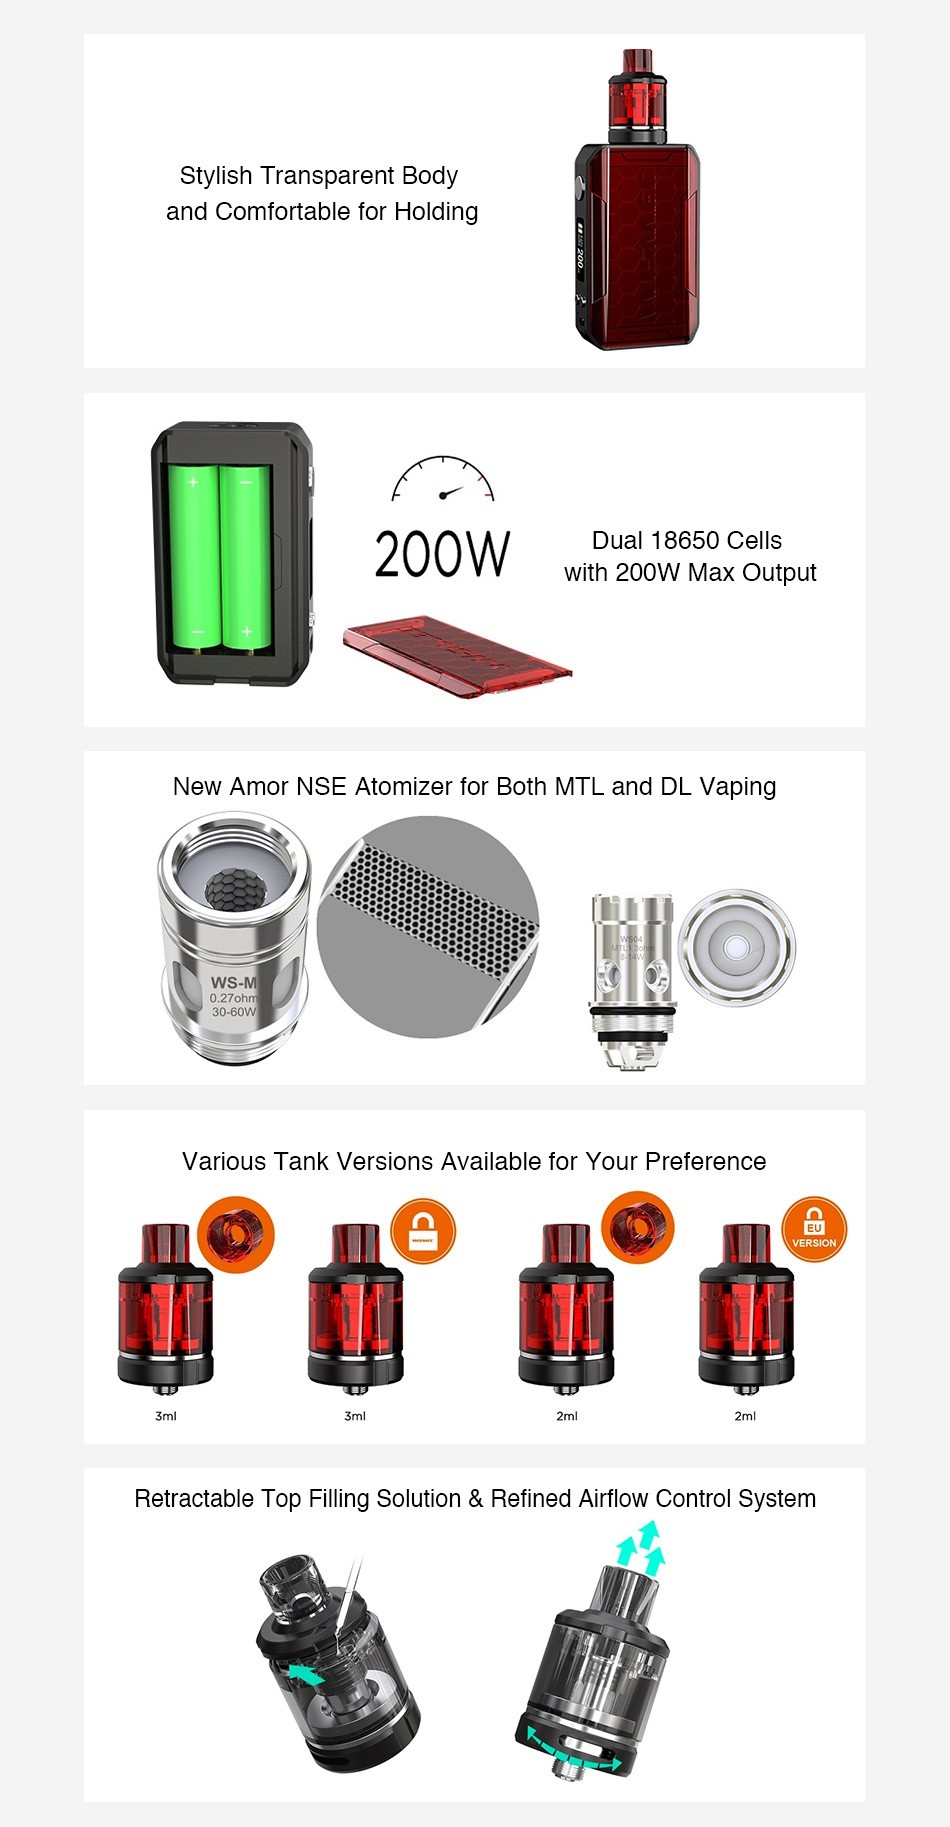 WISMEC SINUOUS V200 200W TC Kit with Amor NSE Stylish Transparent Body and Comfortable for Holding 200W Dual 18650 Cells with 200W Max Output New Amor NsE Atomizer for Both MTL and DL vaping WS M 0 27oh Various tank versions available for your preference VERSION Retractable Top filling solution refined airflow Control system